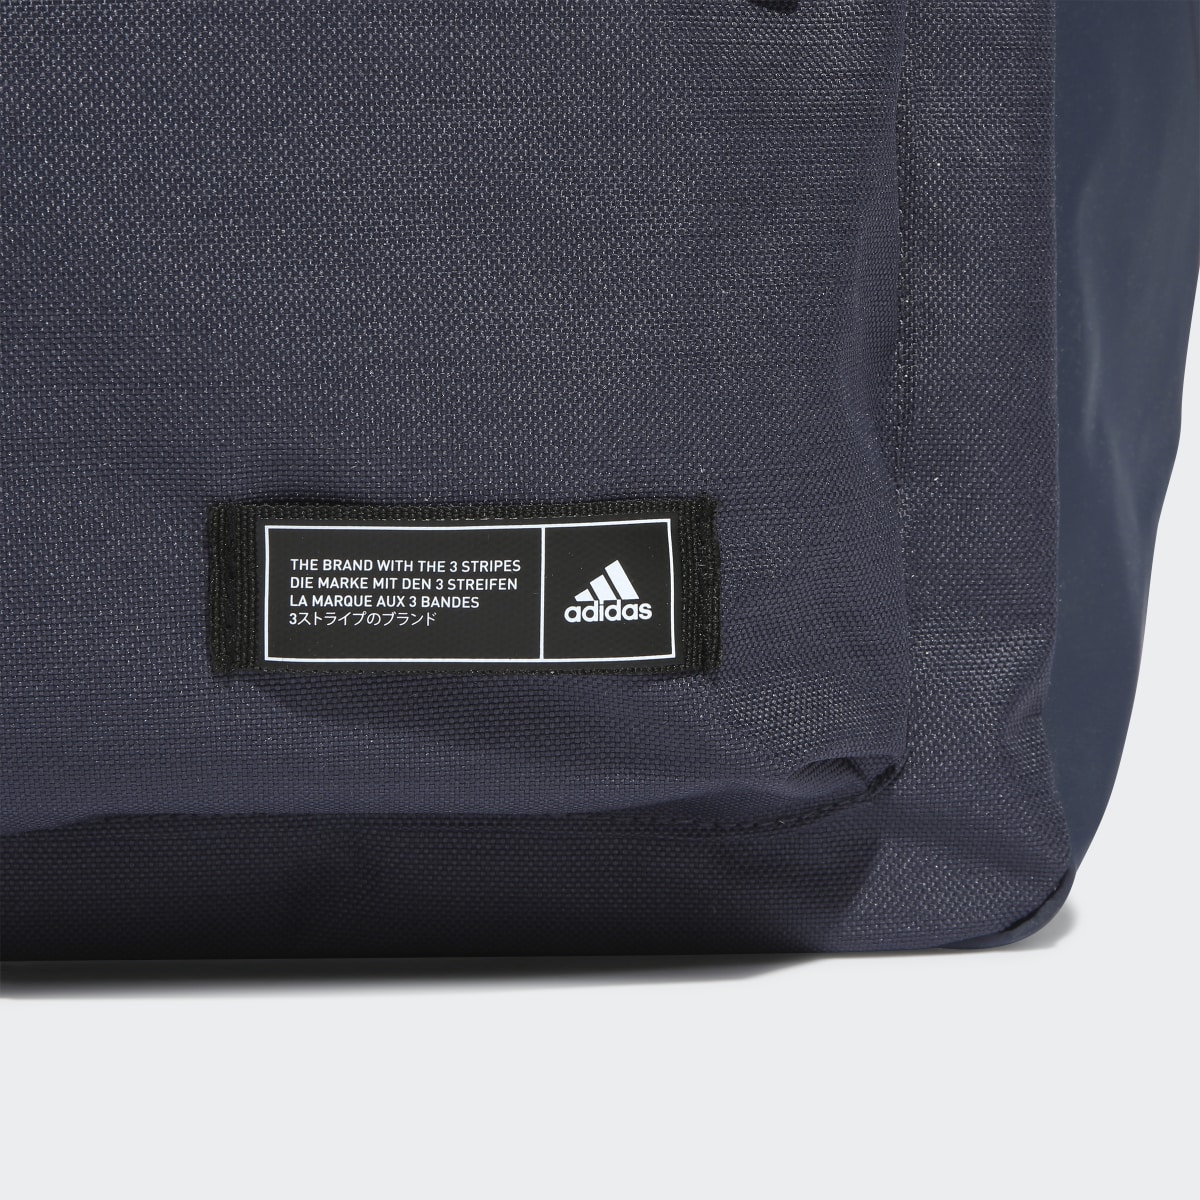 Adidas Classic 3-Stripes Backpack. 6